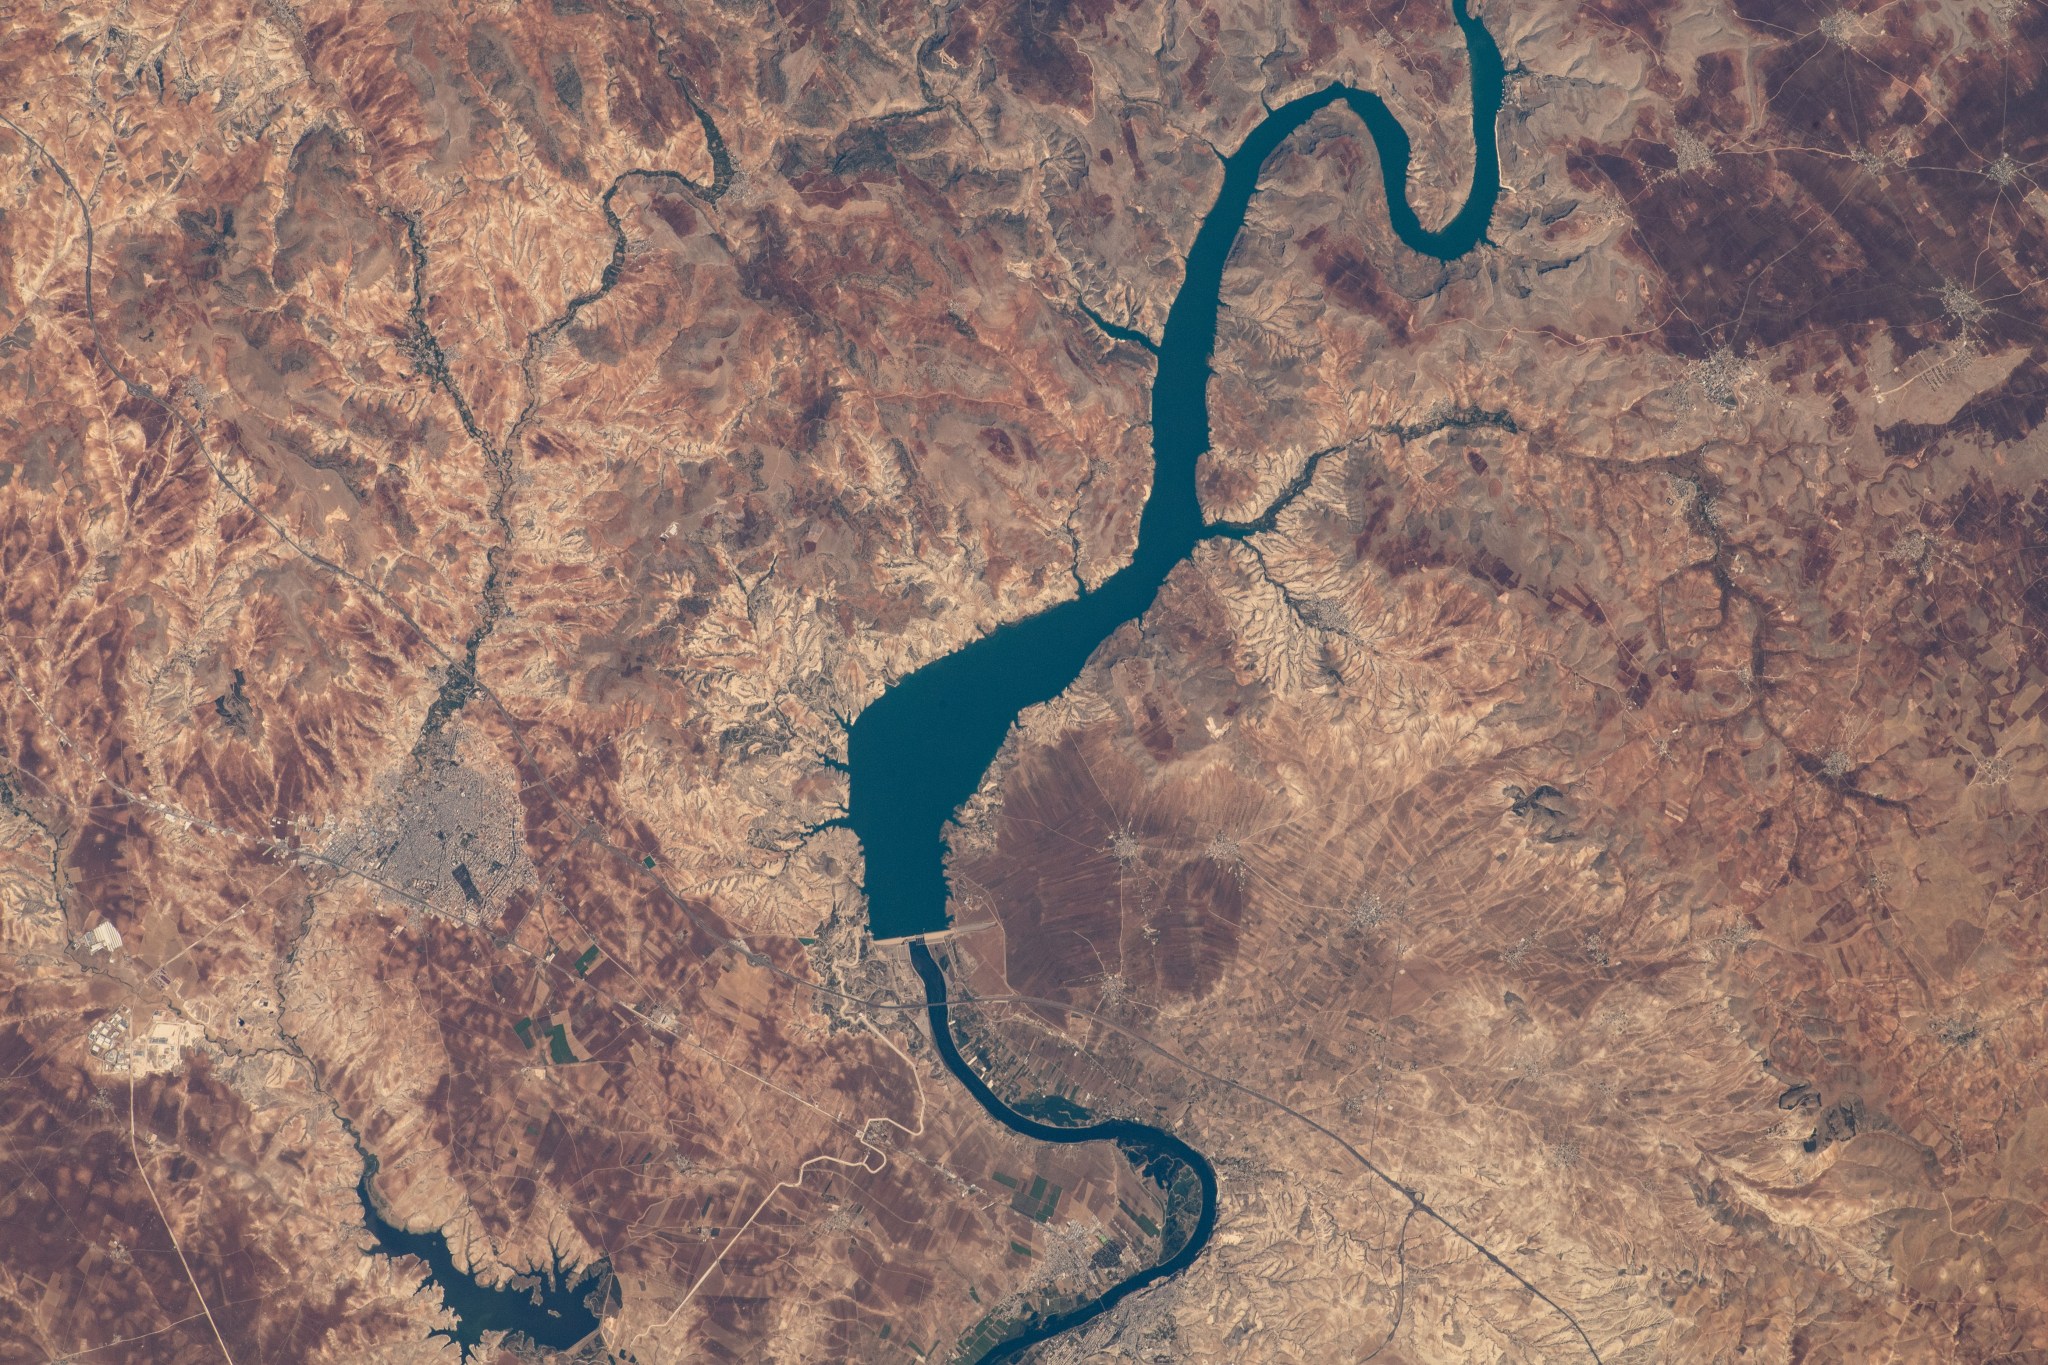 image of a river and a dam surrounded by desert